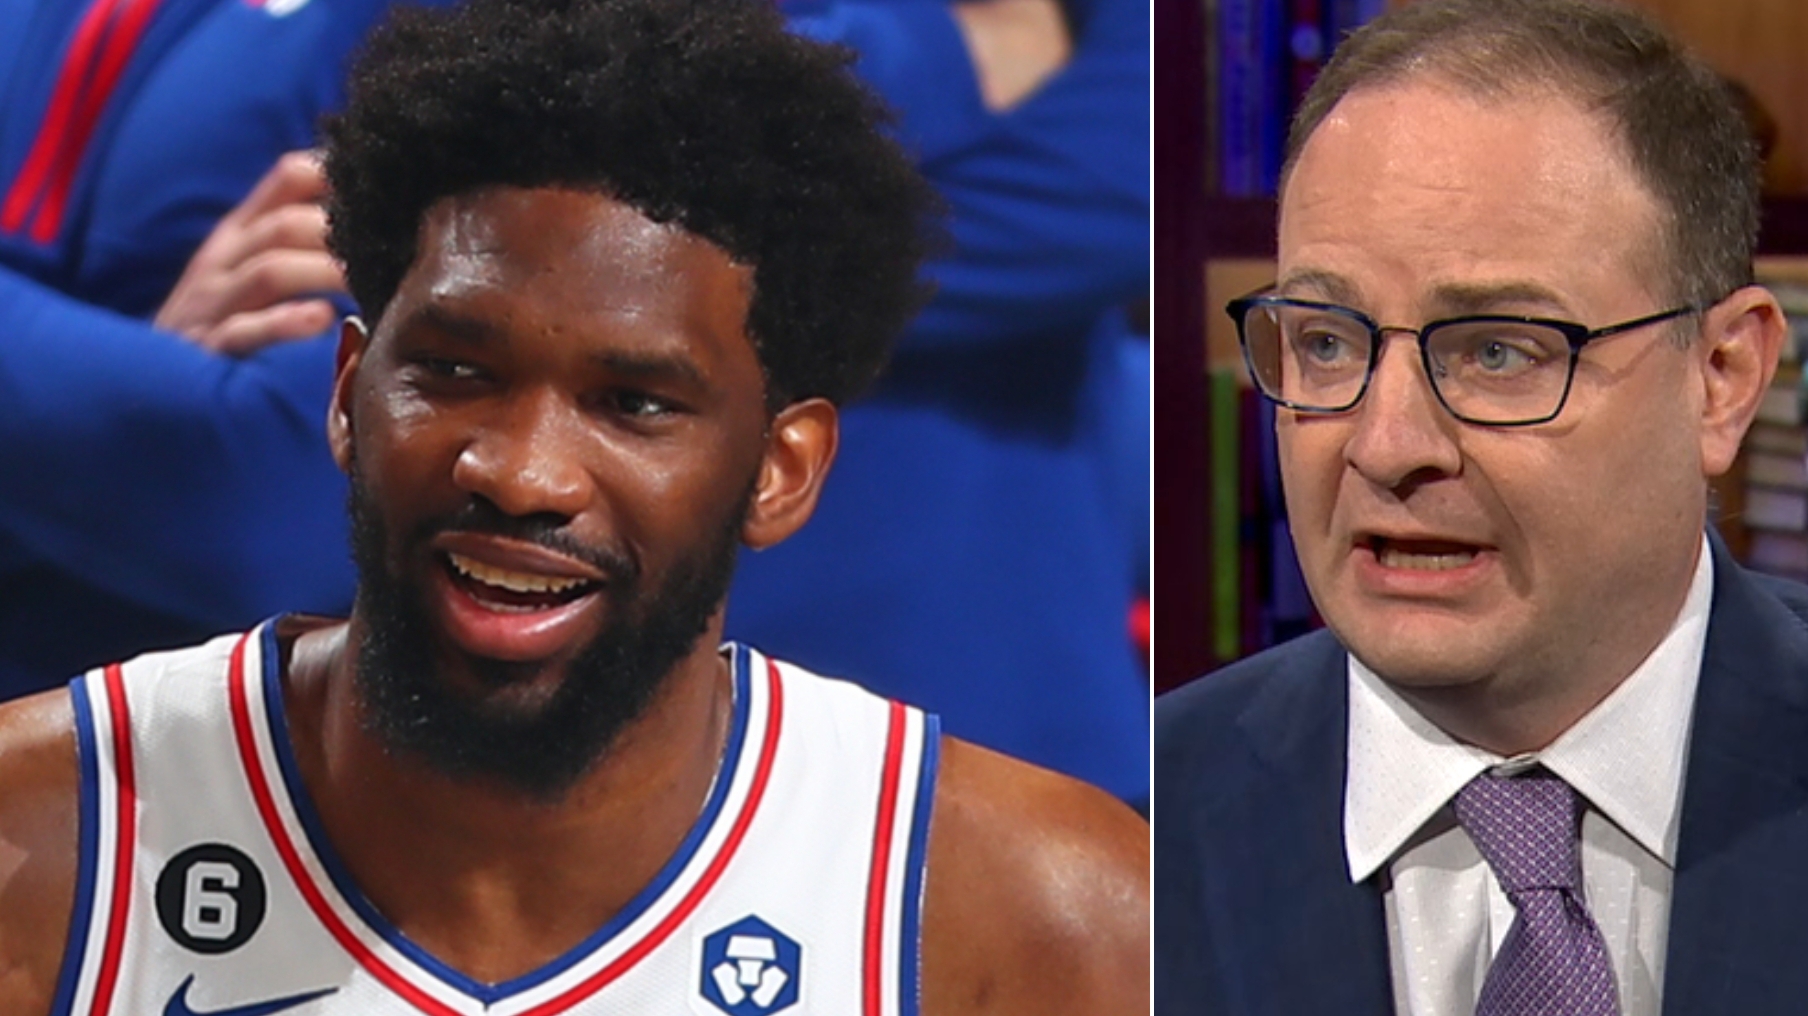 Woj Joel Embiid out for Sixers in Game 4 - Stream the Video